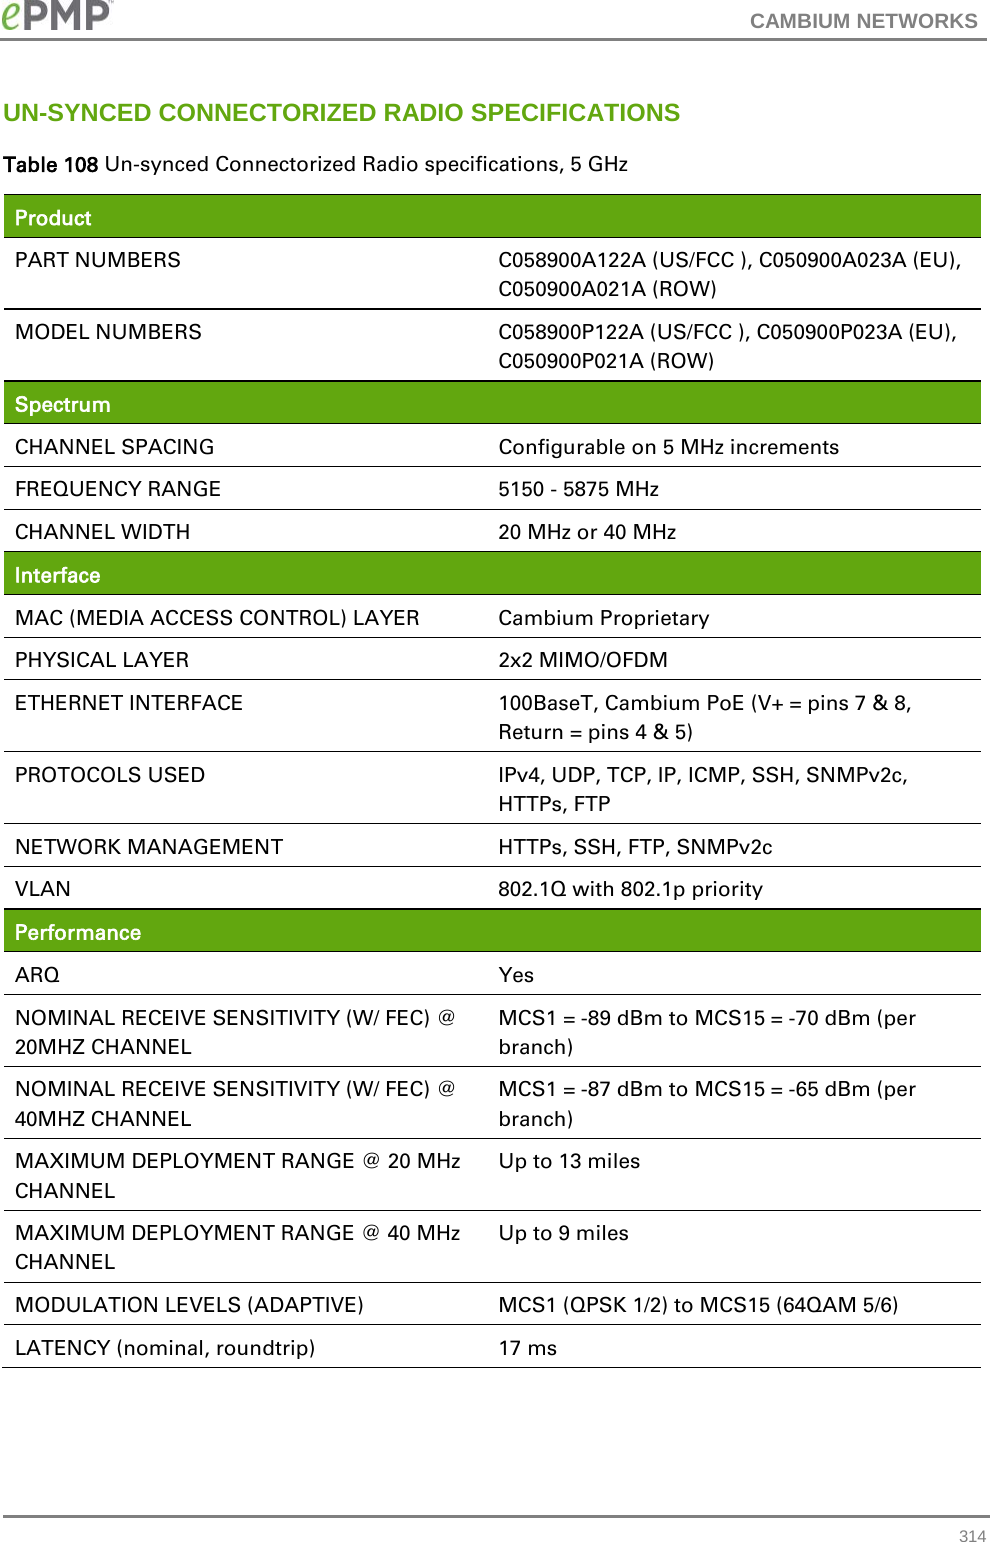 CAMBIUM NETWORKS  UN-SYNCED CONNECTORIZED RADIO SPECIFICATIONS Table 108 Un-synced Connectorized Radio specifications, 5 GHz Product  PART NUMBERS C058900A122A (US/FCC ), C050900A023A (EU), C050900A021A (ROW) MODEL NUMBERS C058900P122A (US/FCC ), C050900P023A (EU), C050900P021A (ROW) Spectrum  CHANNEL SPACING Configurable on 5 MHz increments FREQUENCY RANGE 5150 - 5875 MHz CHANNEL WIDTH 20 MHz or 40 MHz Interface  MAC (MEDIA ACCESS CONTROL) LAYER Cambium Proprietary PHYSICAL LAYER 2x2 MIMO/OFDM ETHERNET INTERFACE 100BaseT, Cambium PoE (V+ = pins 7 &amp; 8, Return = pins 4 &amp; 5) PROTOCOLS USED IPv4, UDP, TCP, IP, ICMP, SSH, SNMPv2c, HTTPs, FTP NETWORK MANAGEMENT HTTPs, SSH, FTP, SNMPv2c VLAN 802.1Q with 802.1p priority Performance  ARQ Yes NOMINAL RECEIVE SENSITIVITY (W/ FEC) @ 20MHZ CHANNEL MCS1 = -89 dBm to MCS15 = -70 dBm (per branch) NOMINAL RECEIVE SENSITIVITY (W/ FEC) @ 40MHZ CHANNEL MCS1 = -87 dBm to MCS15 = -65 dBm (per branch) MAXIMUM DEPLOYMENT RANGE @ 20 MHz CHANNEL Up to 13 miles MAXIMUM DEPLOYMENT RANGE @ 40 MHz CHANNEL Up to 9 miles MODULATION LEVELS (ADAPTIVE) MCS1 (QPSK 1/2) to MCS15 (64QAM 5/6) LATENCY (nominal, roundtrip) 17 ms  314 